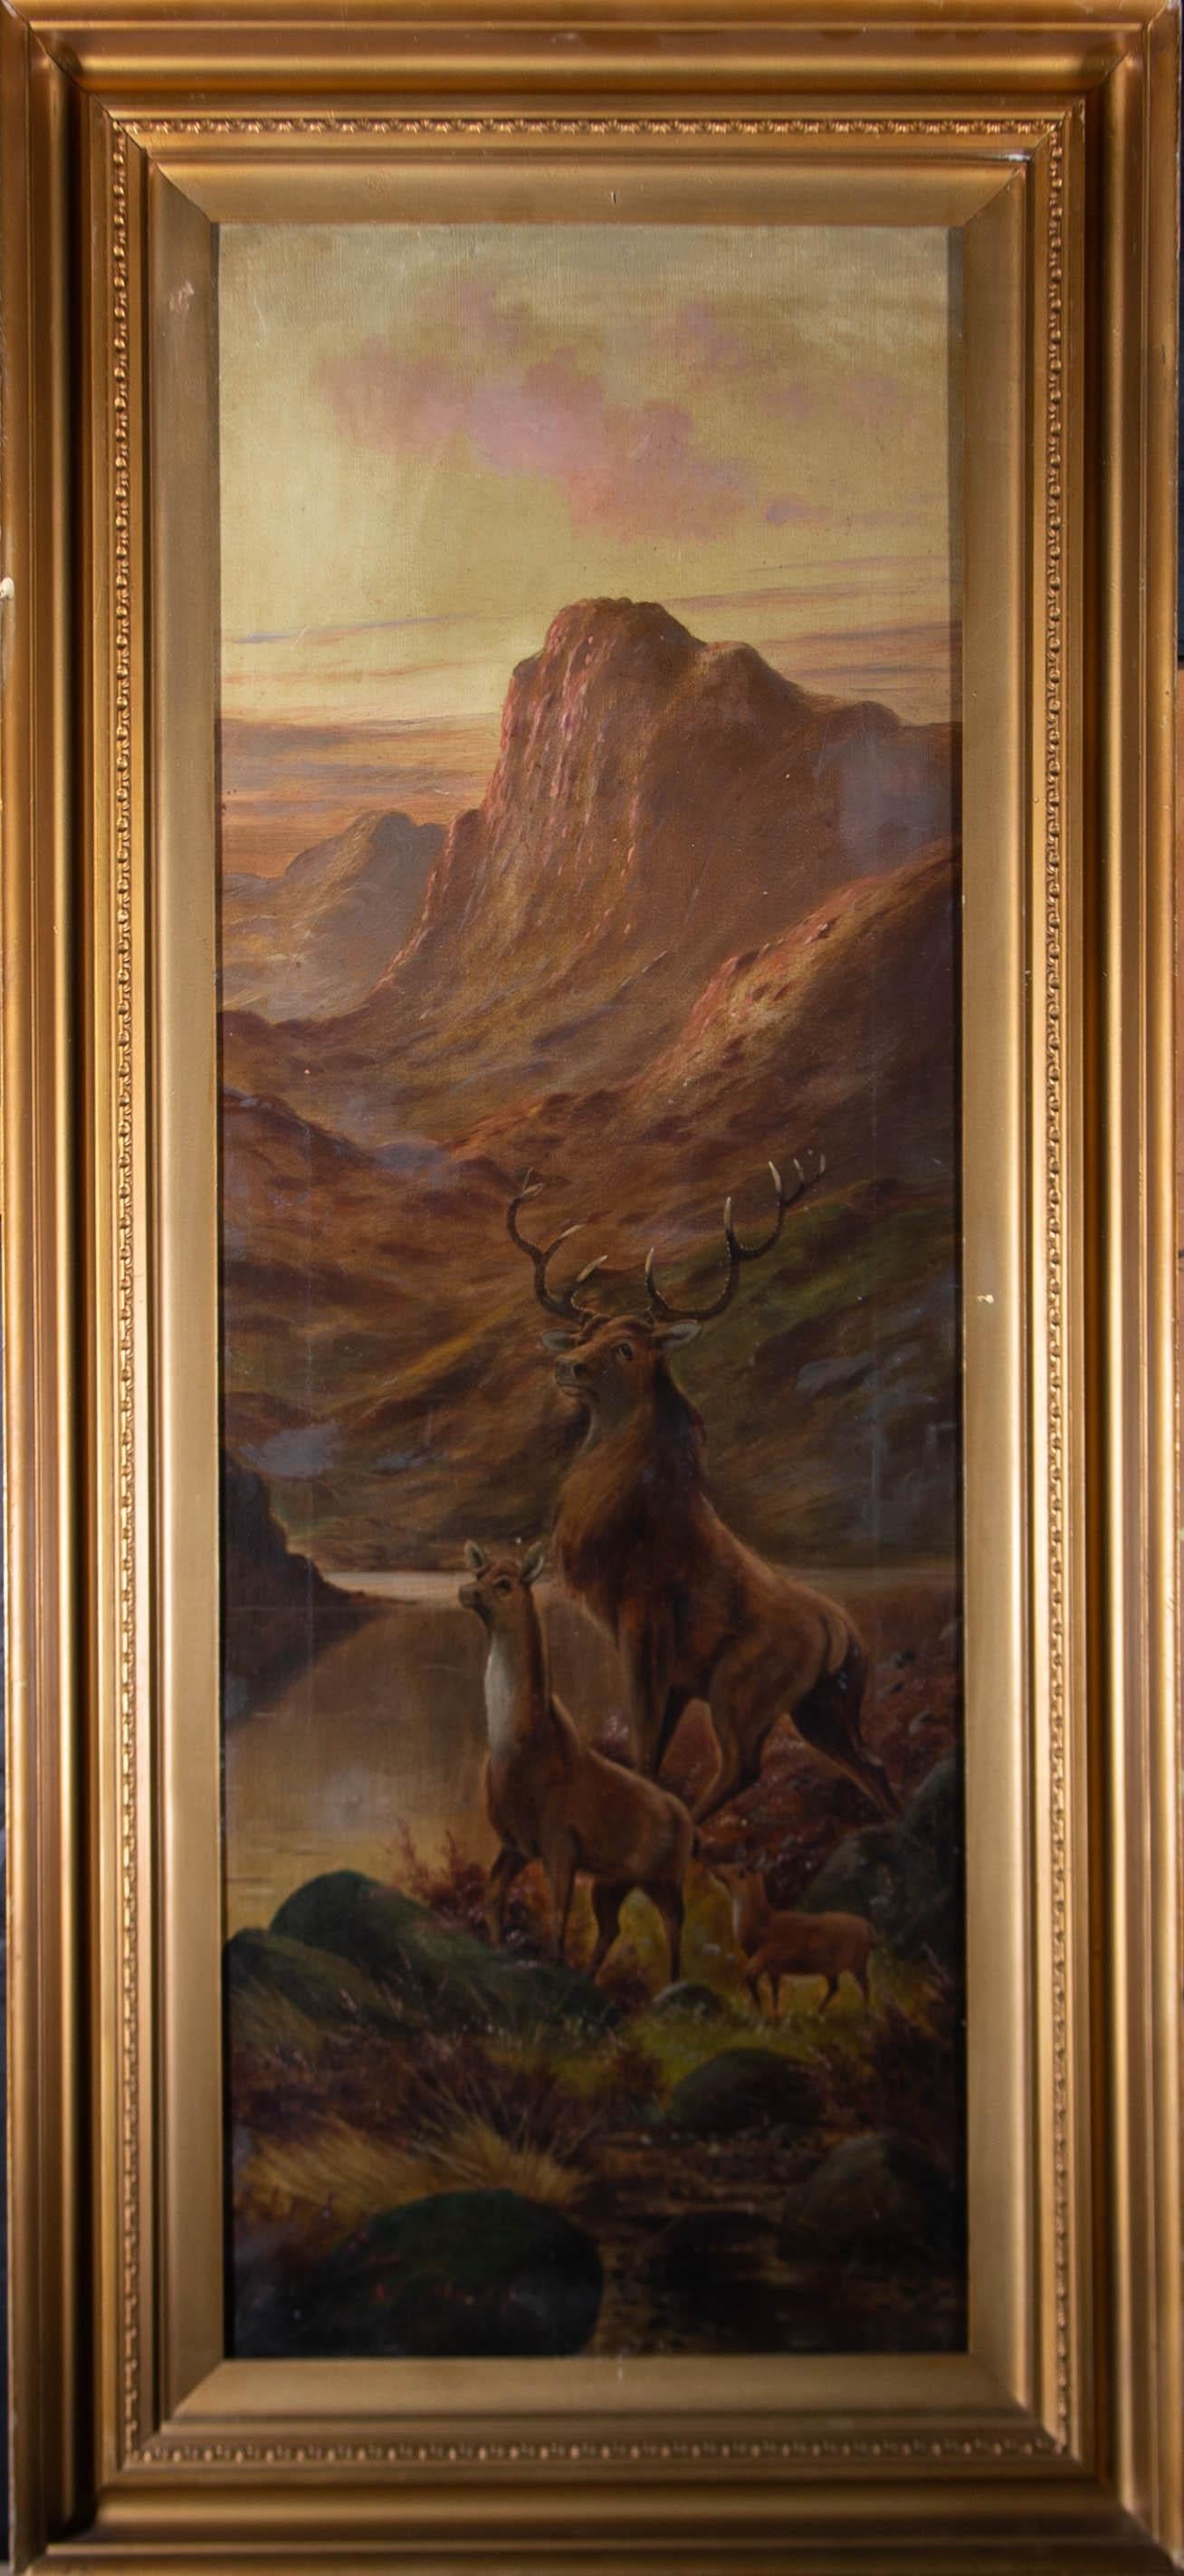 A striking highland landscape with the focus in the foreground on a majestic stag and his family of two red deer. The stag stands proudly behind his hind and young fawn. The dramatic mountainous landscape in the distance is tinted with sunset hues